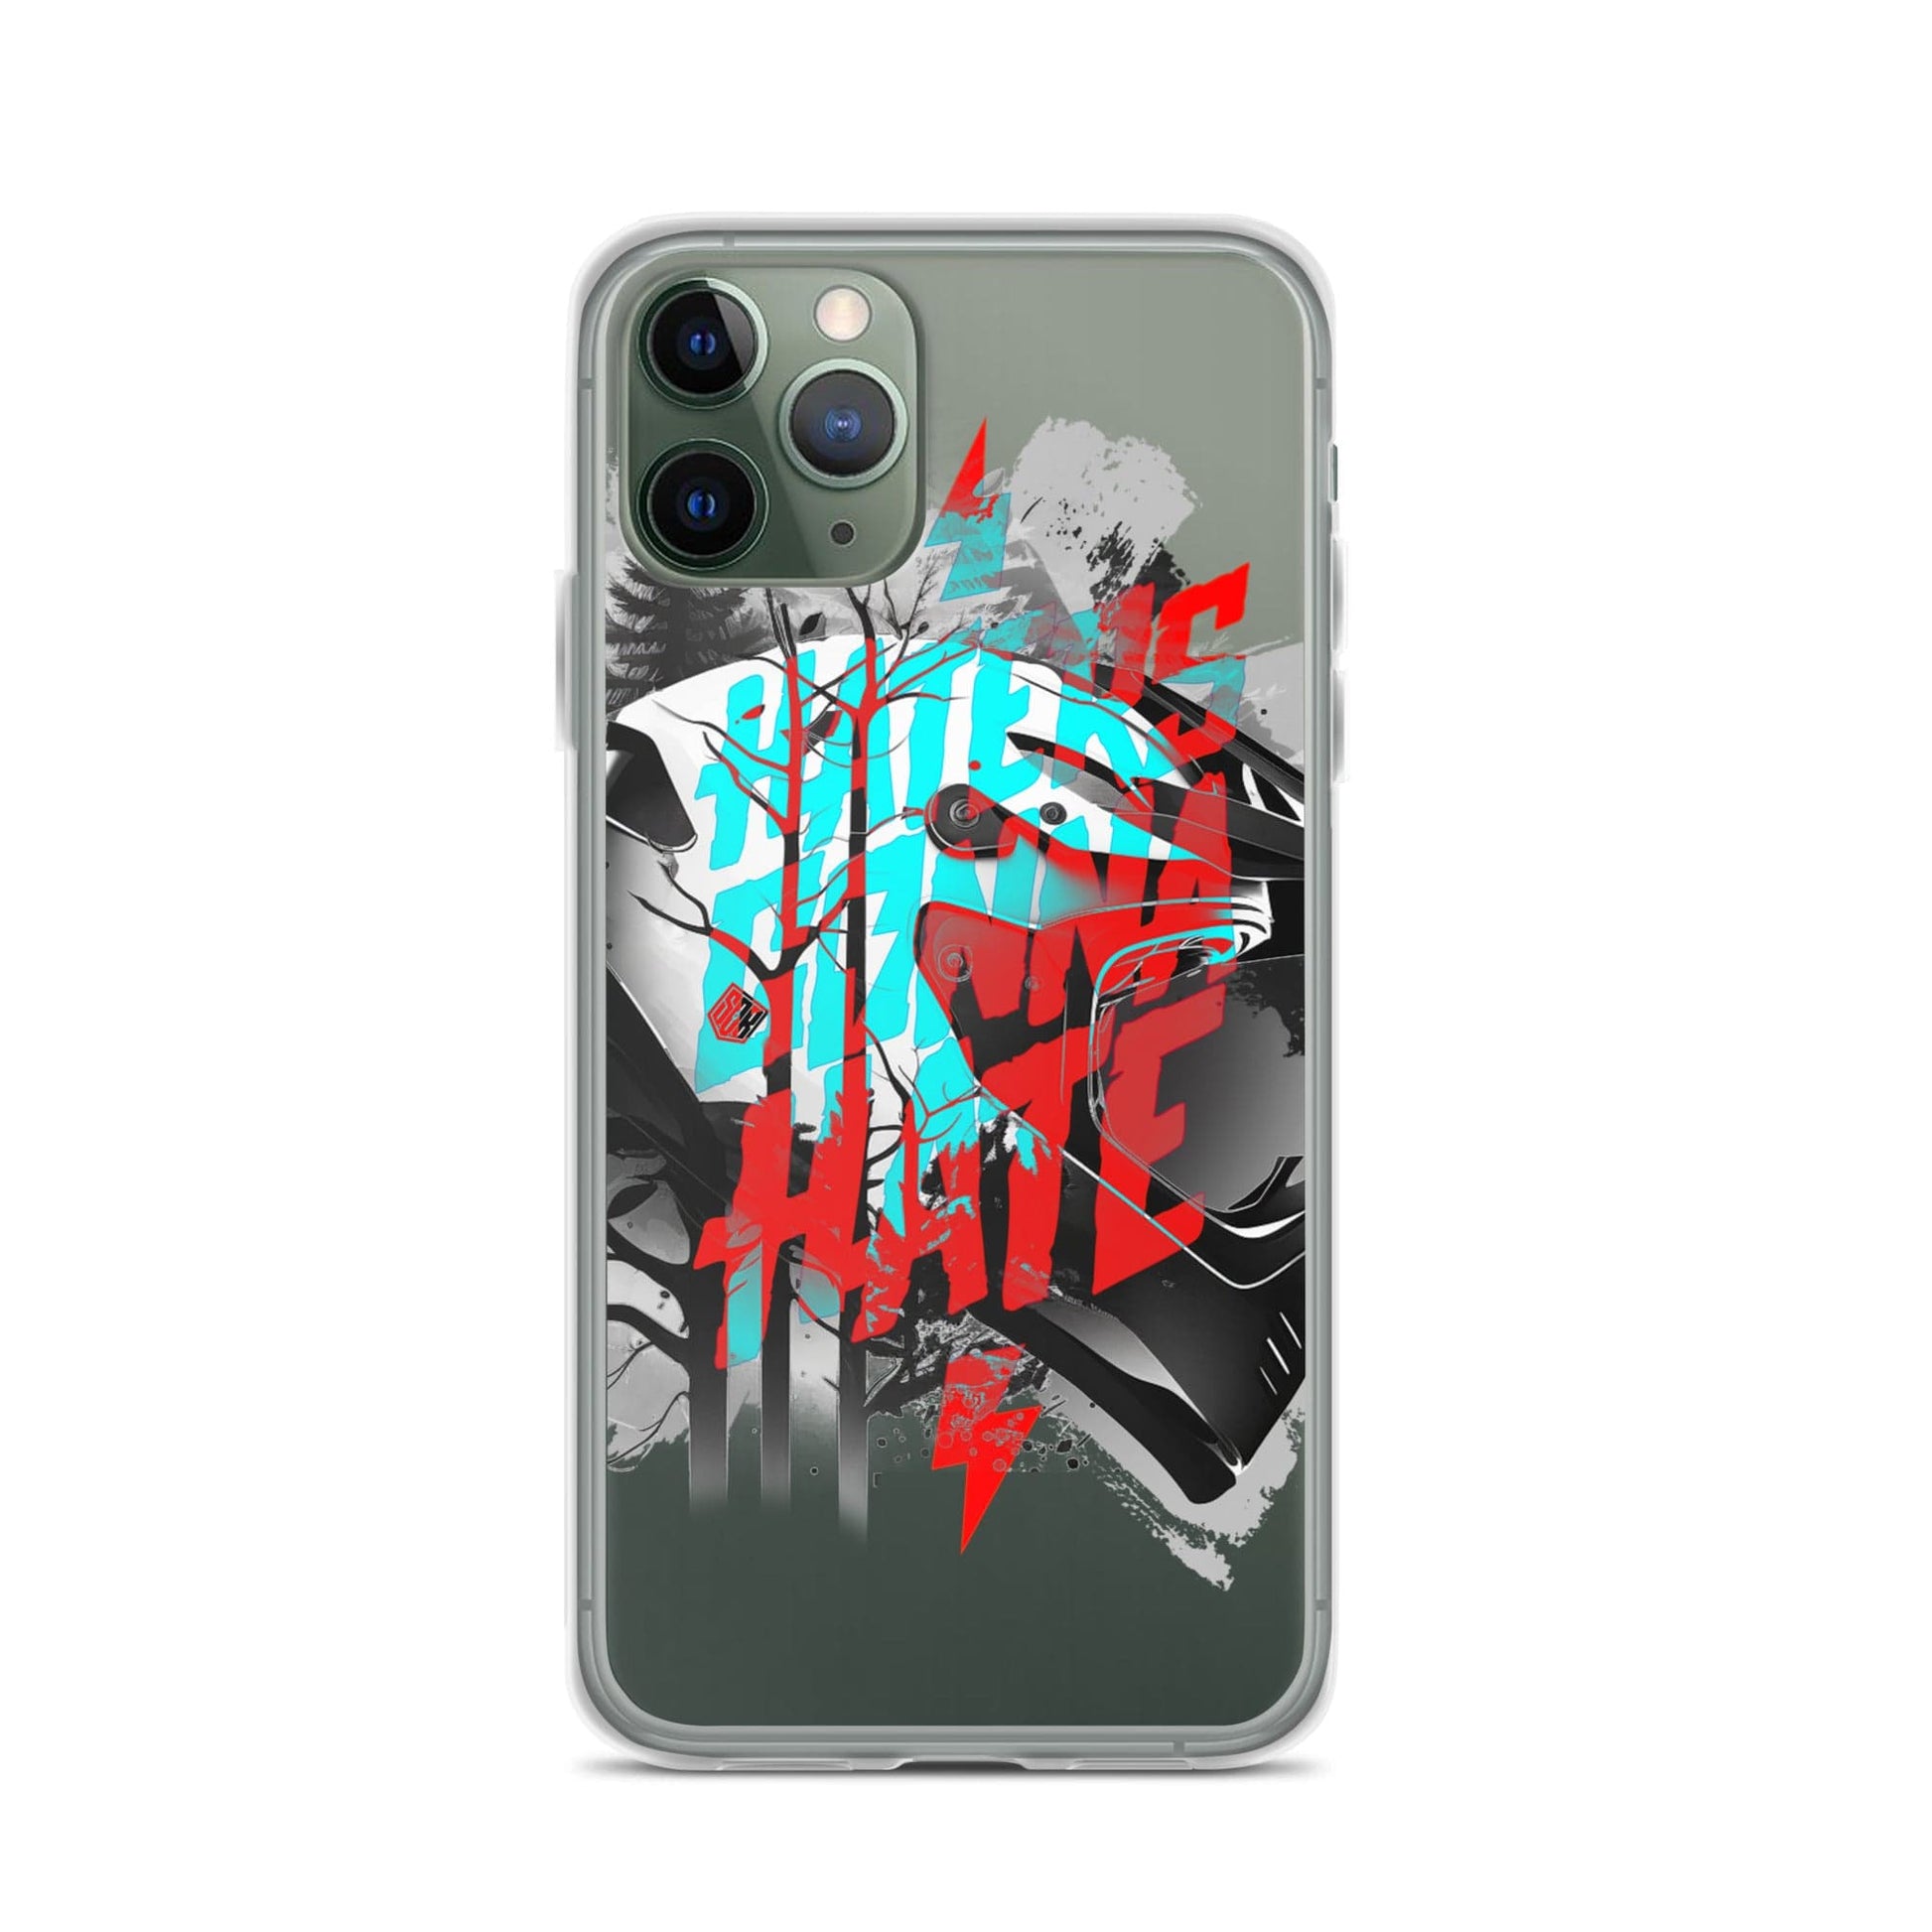 Sons of Battery® - E-MTB Brand & Community iPhone 11 Pro Haters gonna hate - iPhone-Hülle E-Bike-Community